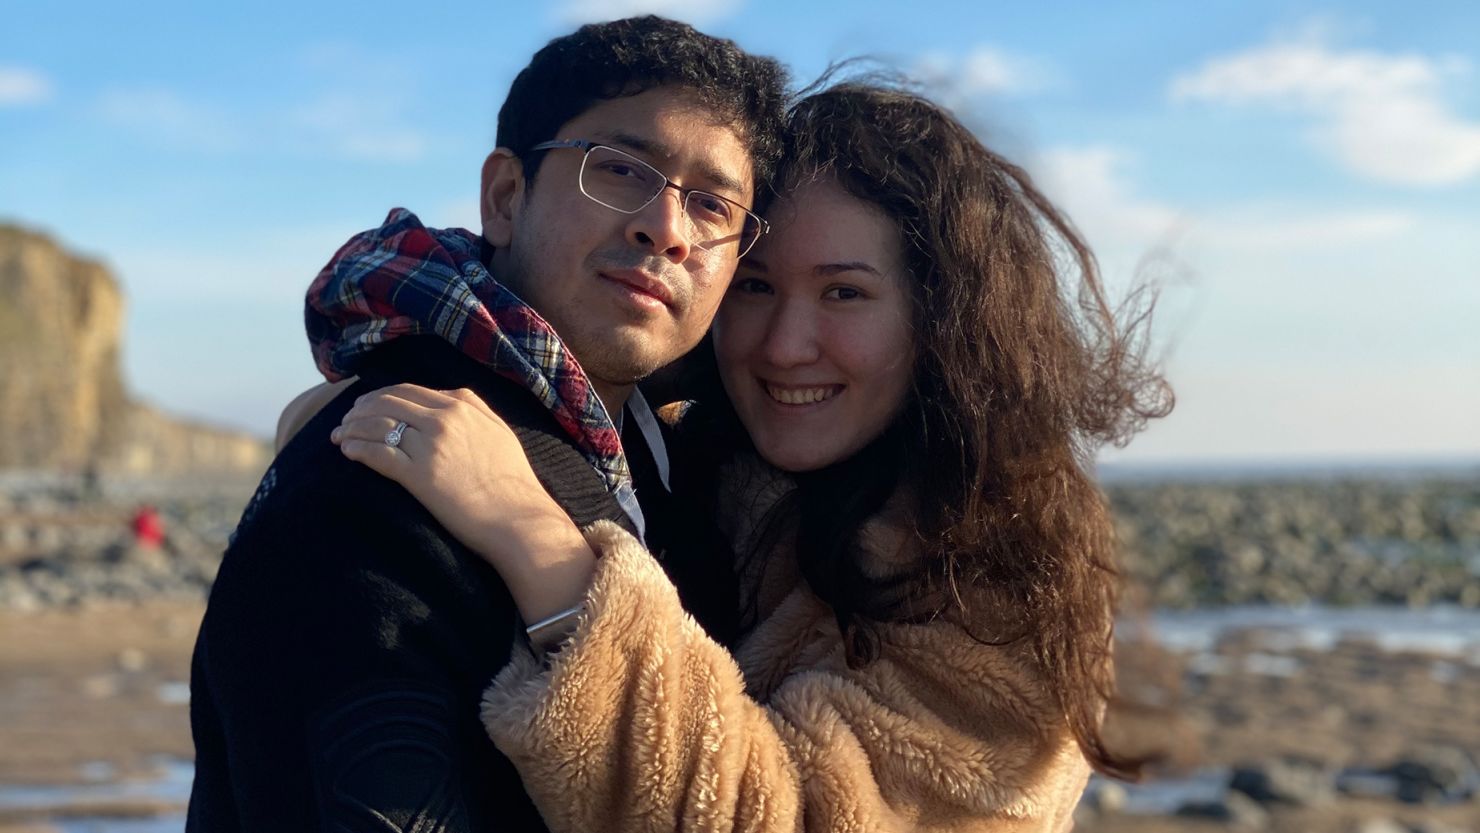 Ariff Hassan and Liliya Dauletaliyeva connected at a wedding in 2018. Then they both flew across the world to continue their connection.